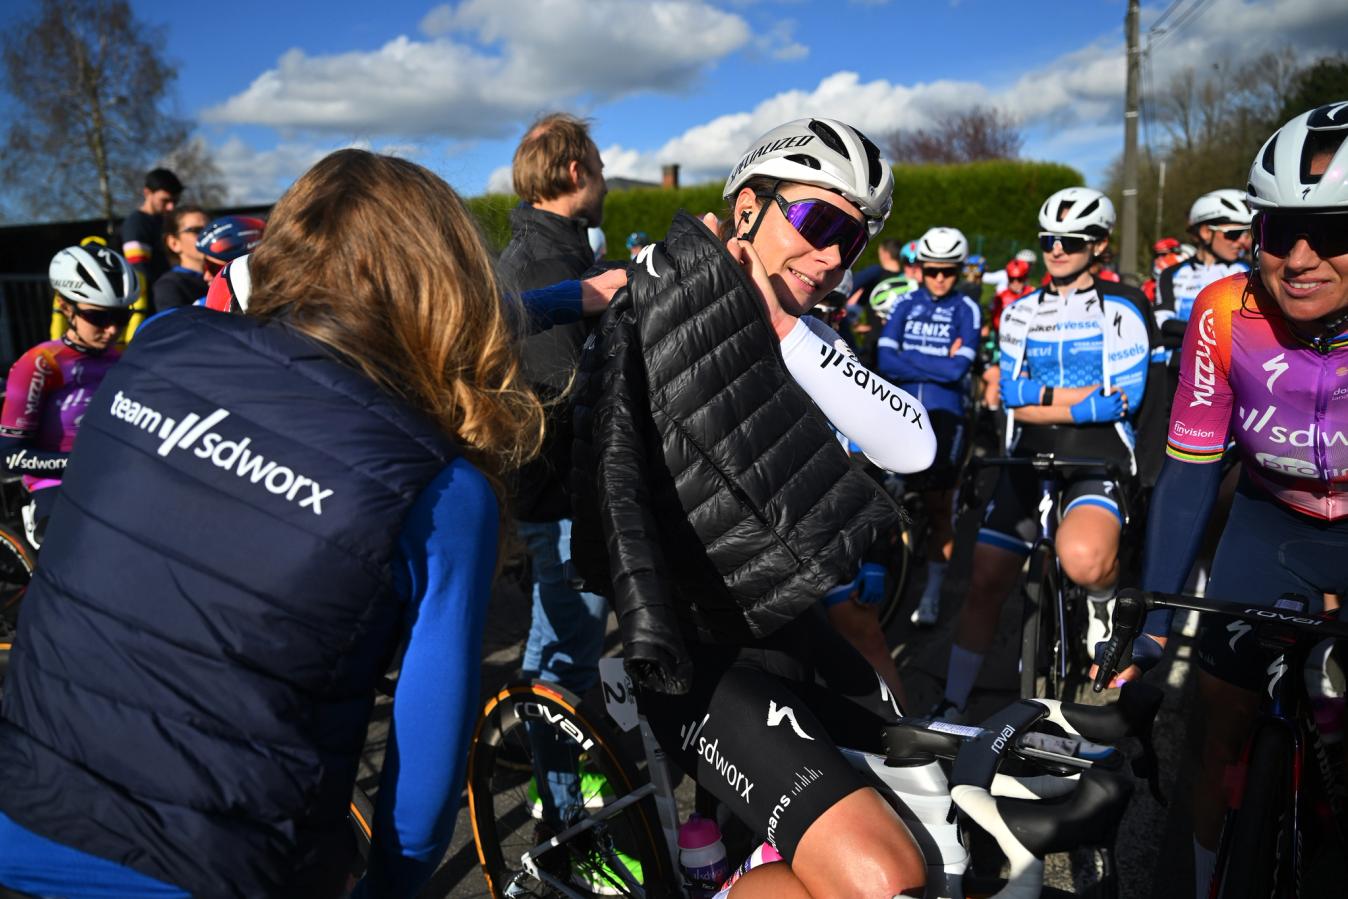 The former two-time world champion Anna van der Breggen hands the current world champion a jacket, as Lotte Kopecky tried to stay warm during the interruption 